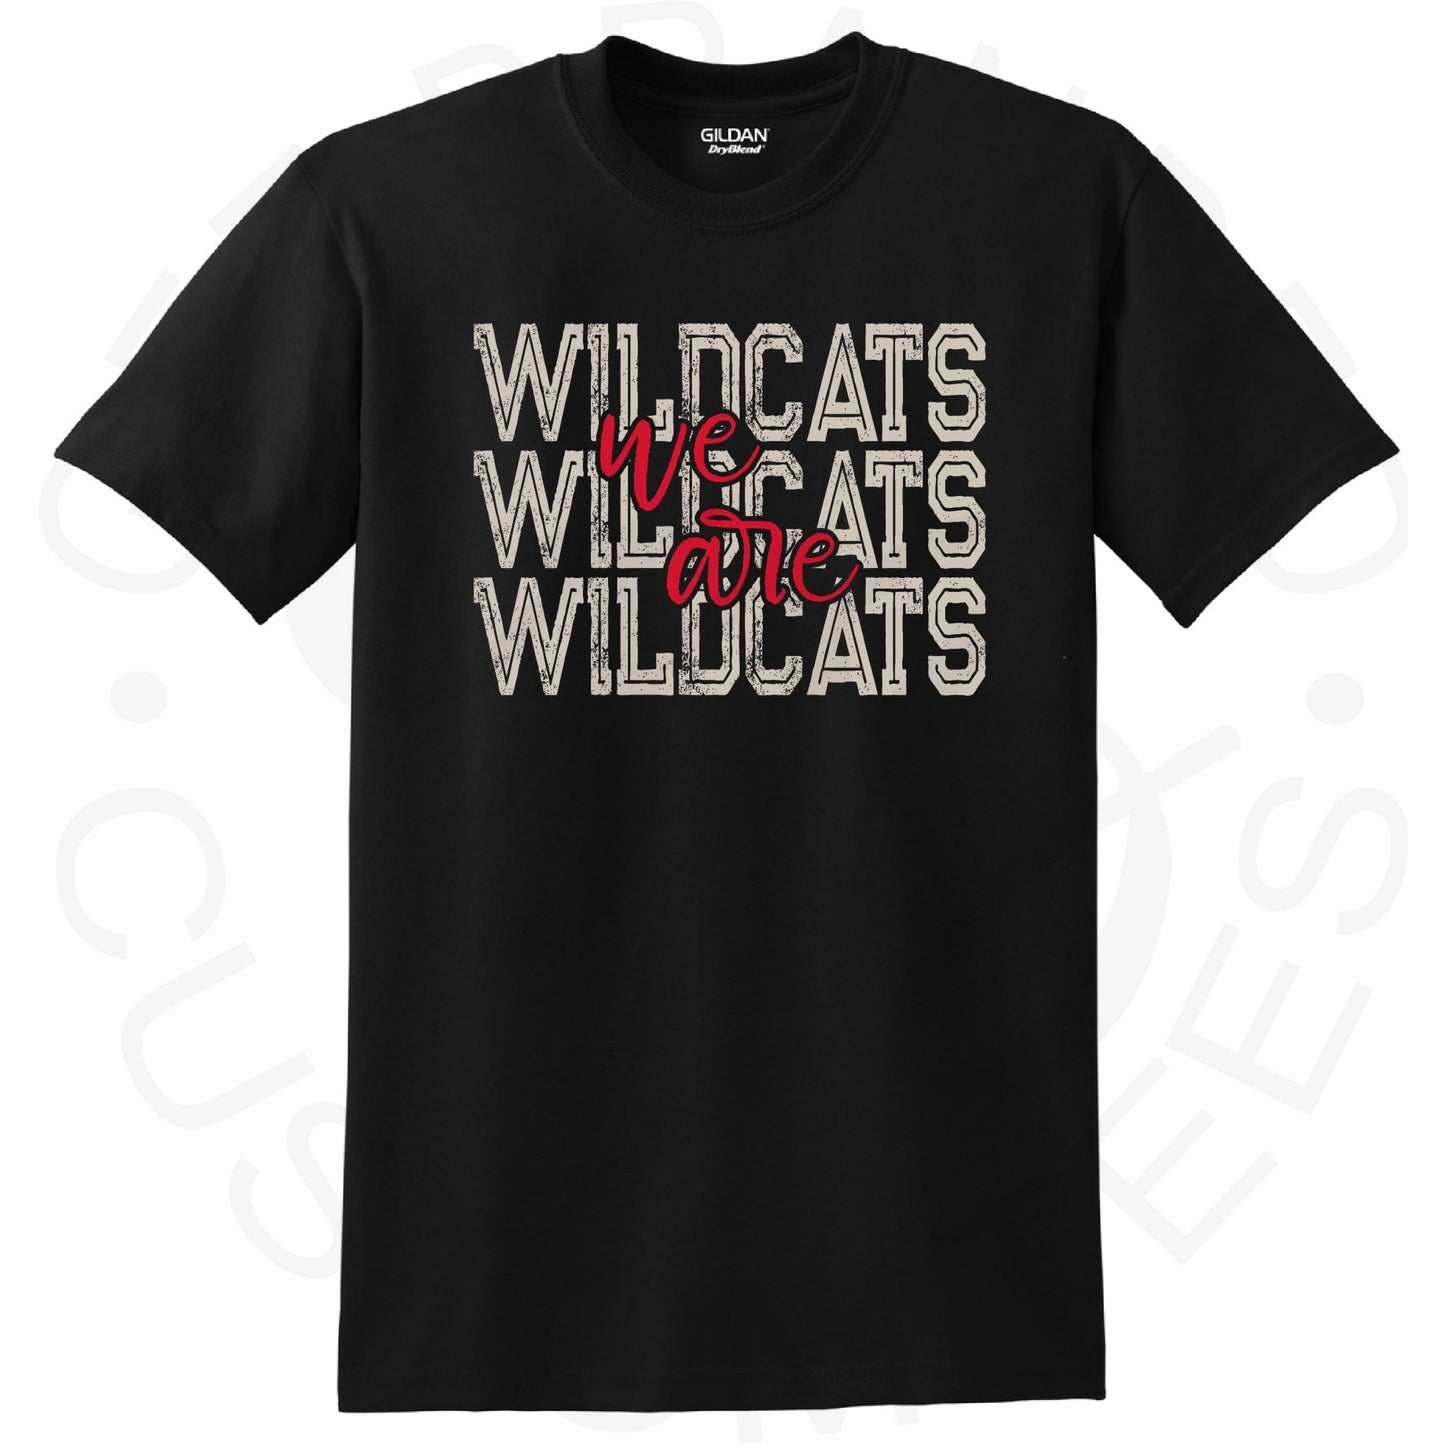 ADULT We Are Wildcats Tees- Black with Silver Metallic Ink